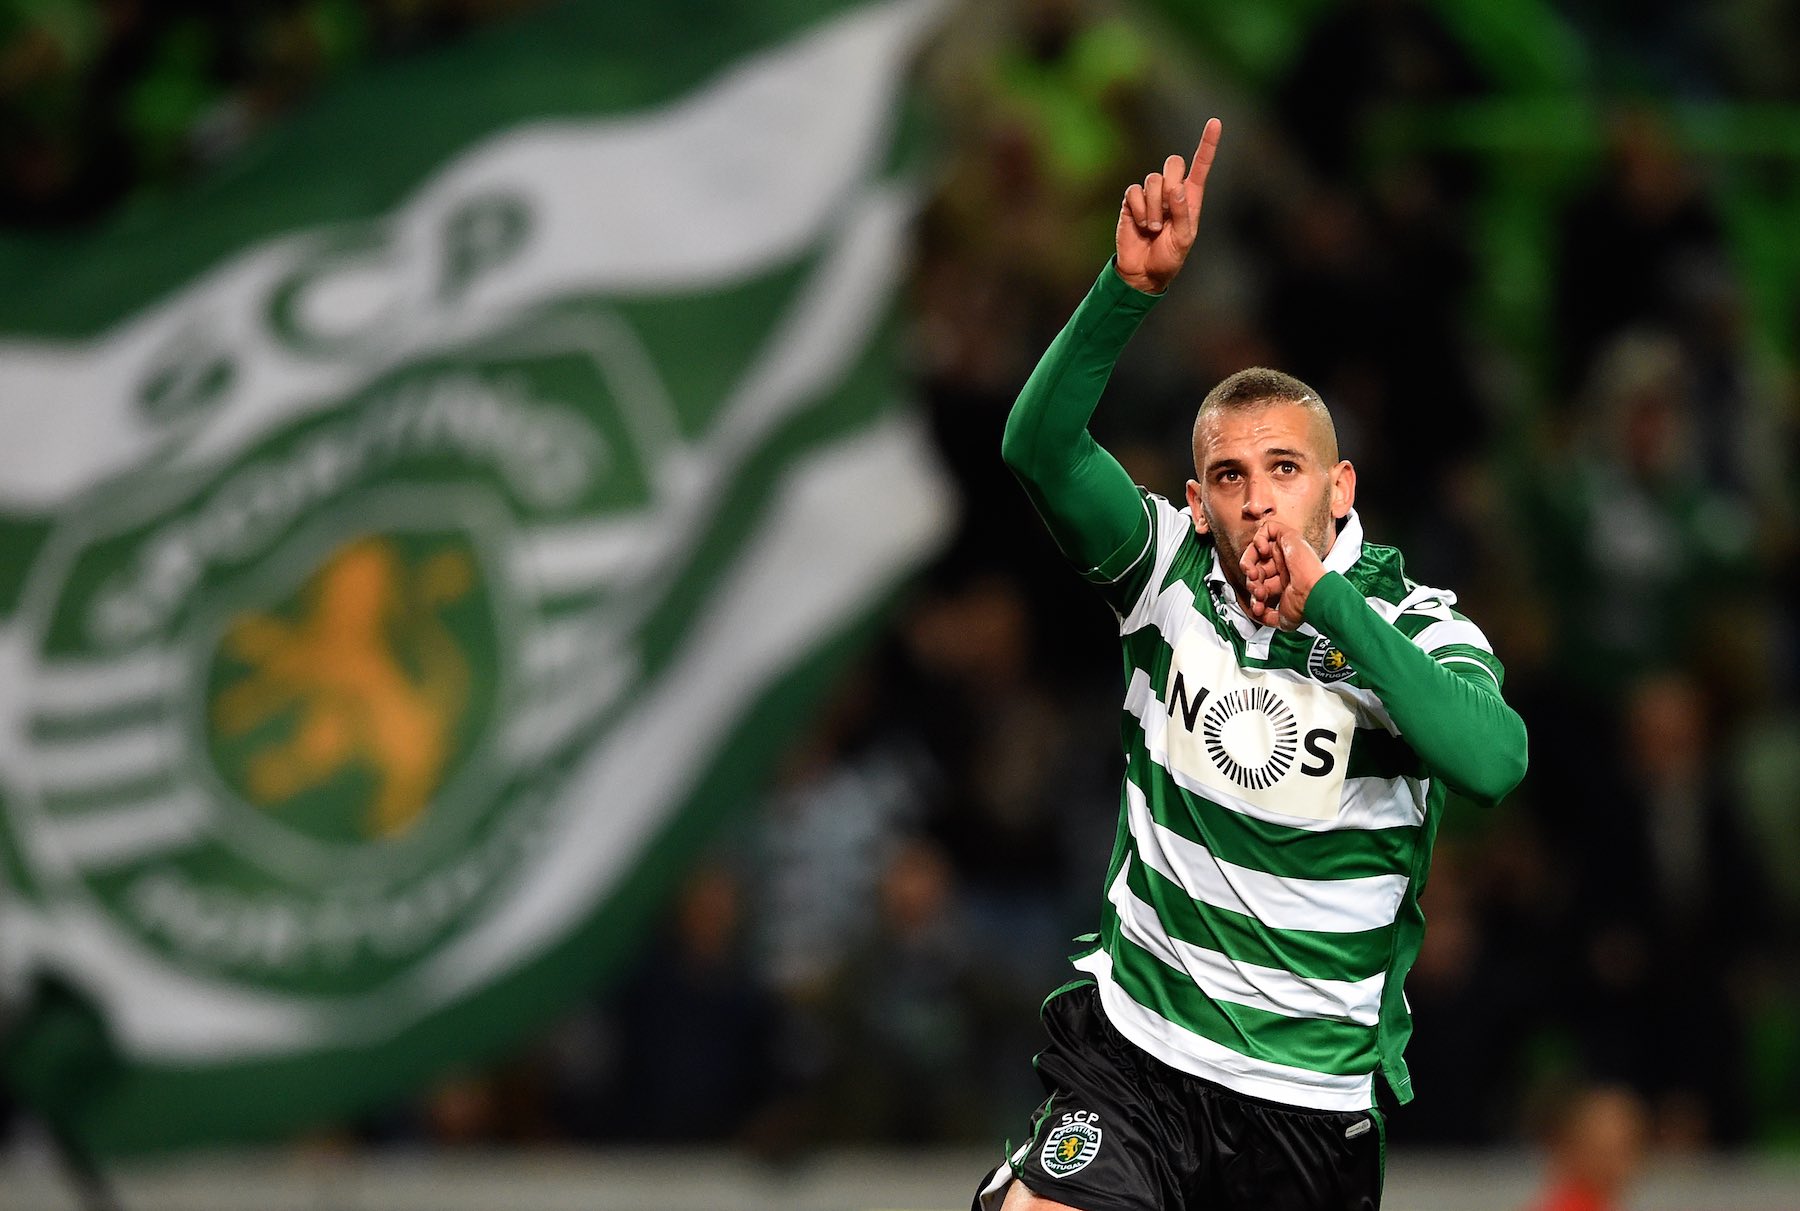 Sporting's Algerian forward Islam Slimani celebrates after scoring the opening goal during the Portuguese League football match Sporting CP vs FC Porto at Alvalade stadium in Lisbon on January 2, 2016.   AFP PHOTO/ FRANCISCO LEONG / AFP / FRANCISCO LEONG        (Photo credit should read FRANCISCO LEONG/AFP/Getty Images)